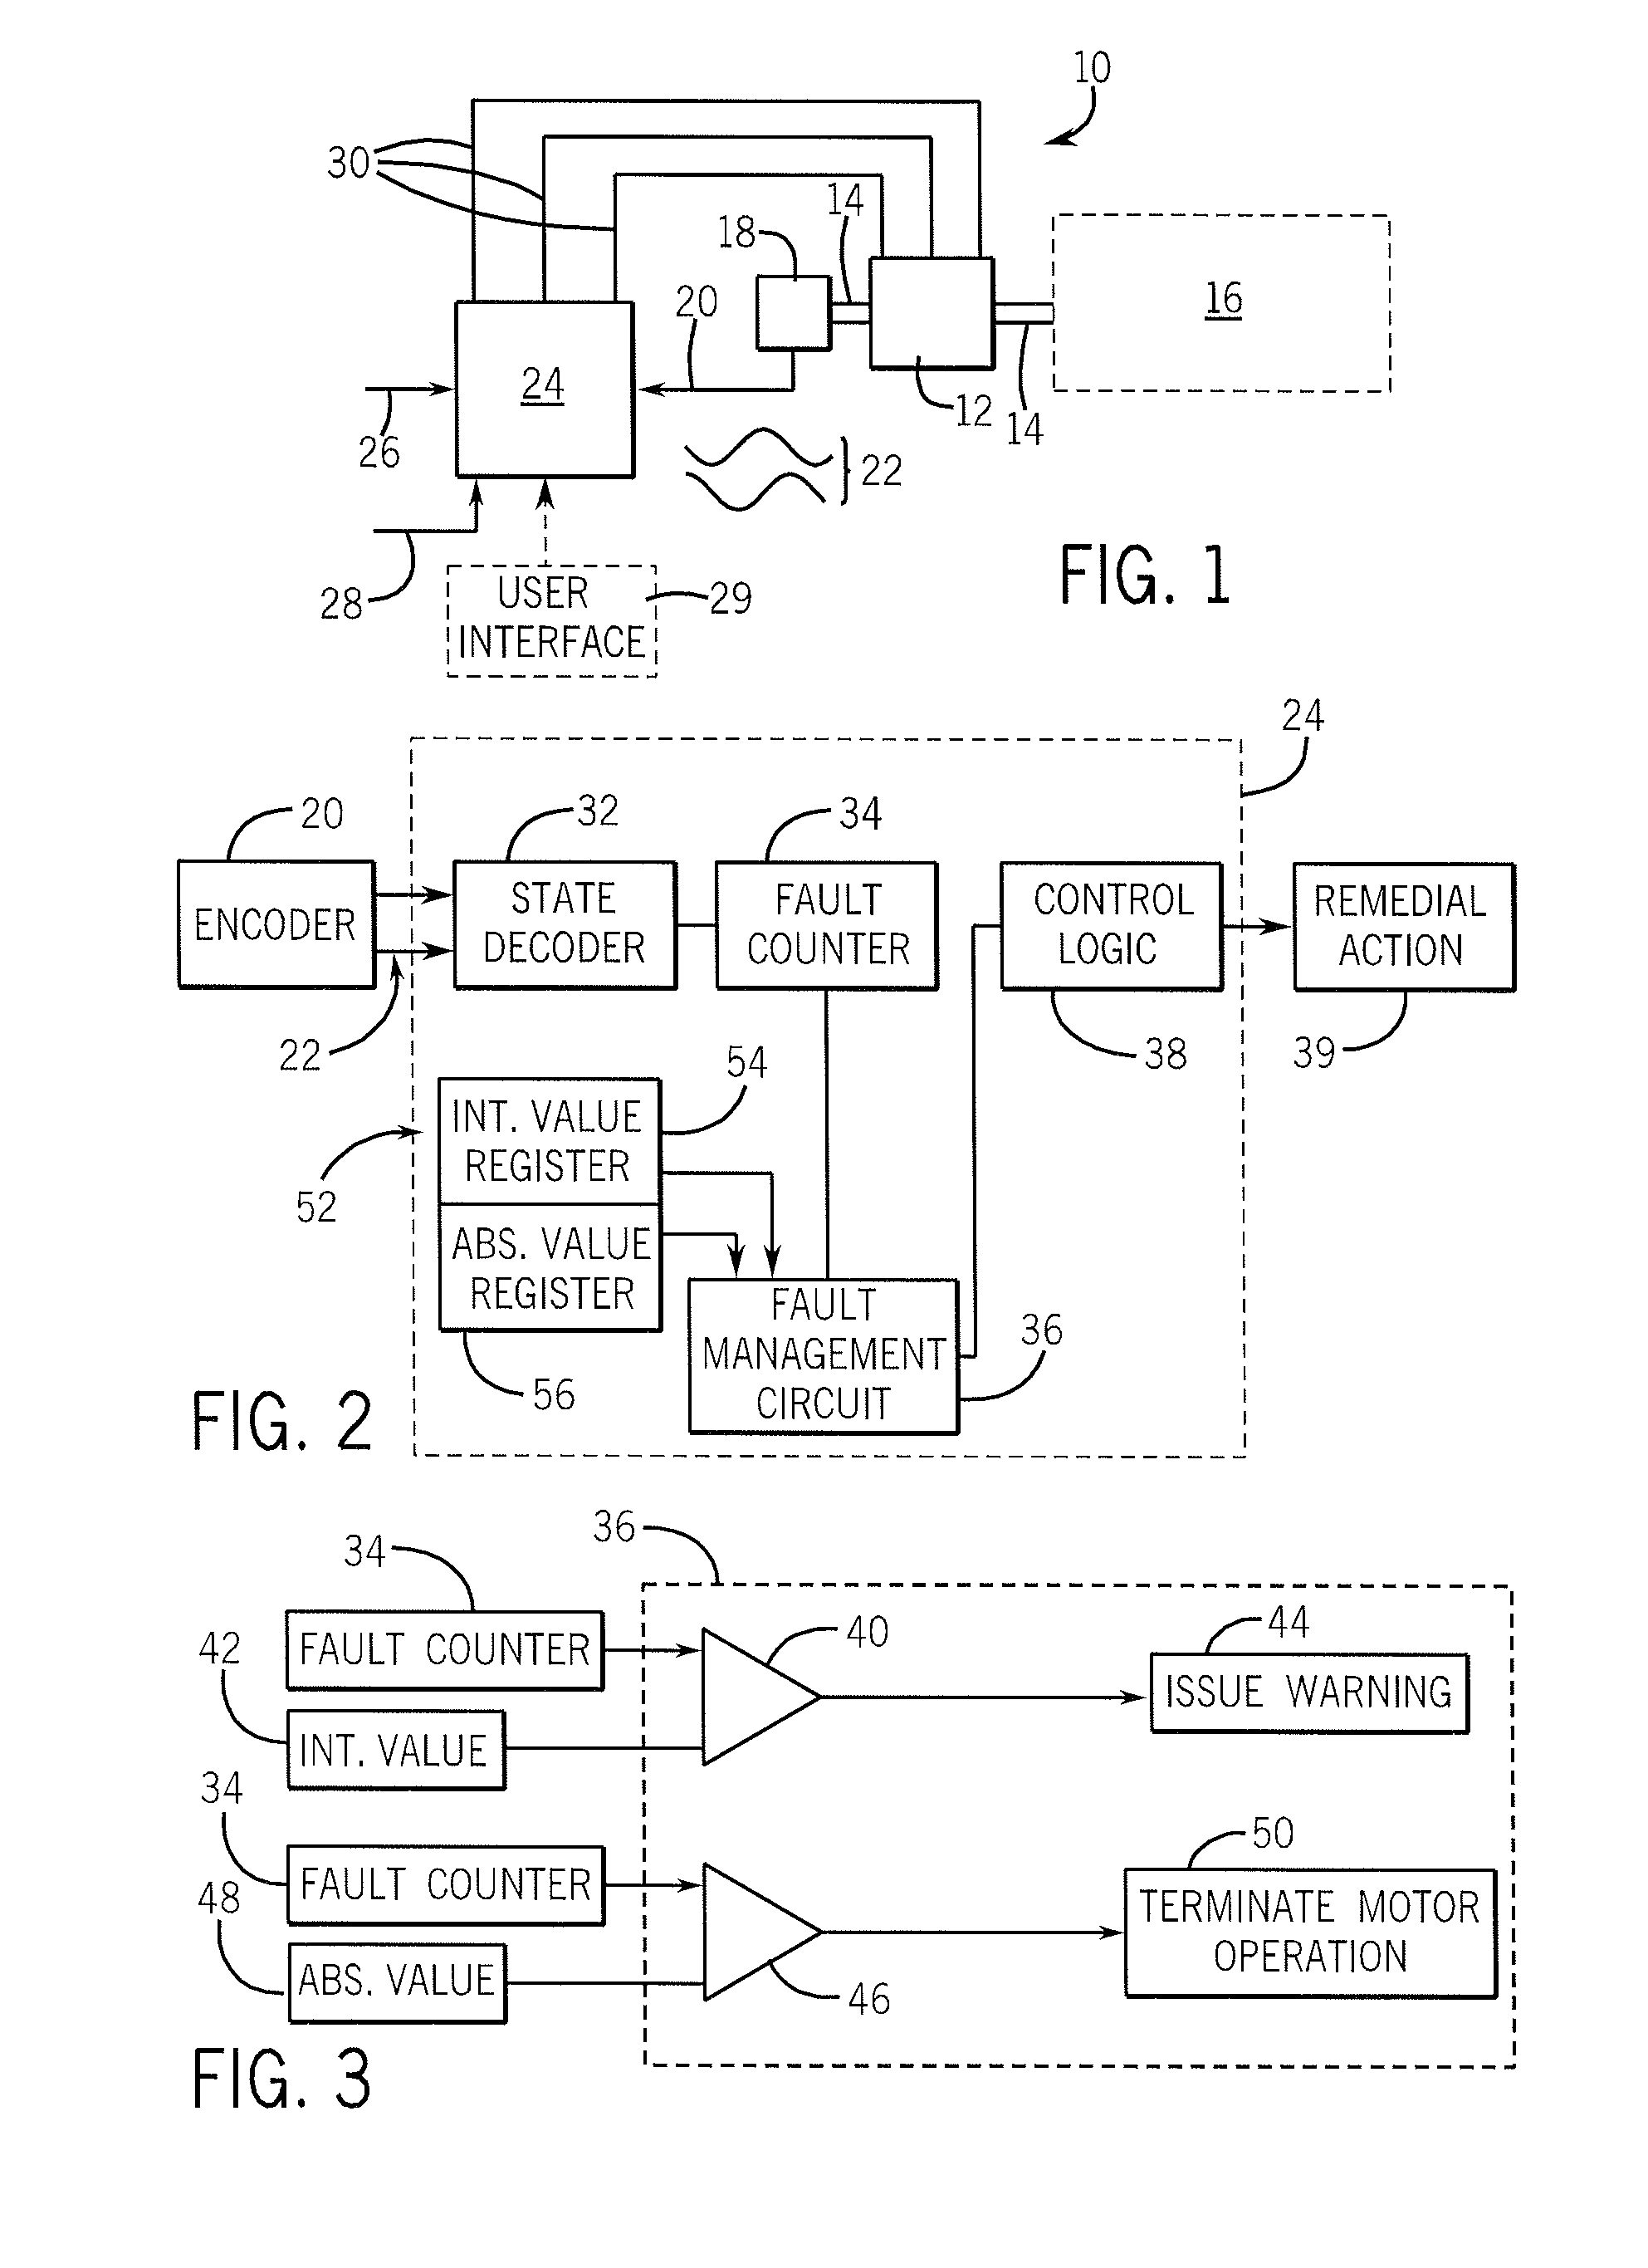 Motor controller having counter to count position error events and method of motor control using same